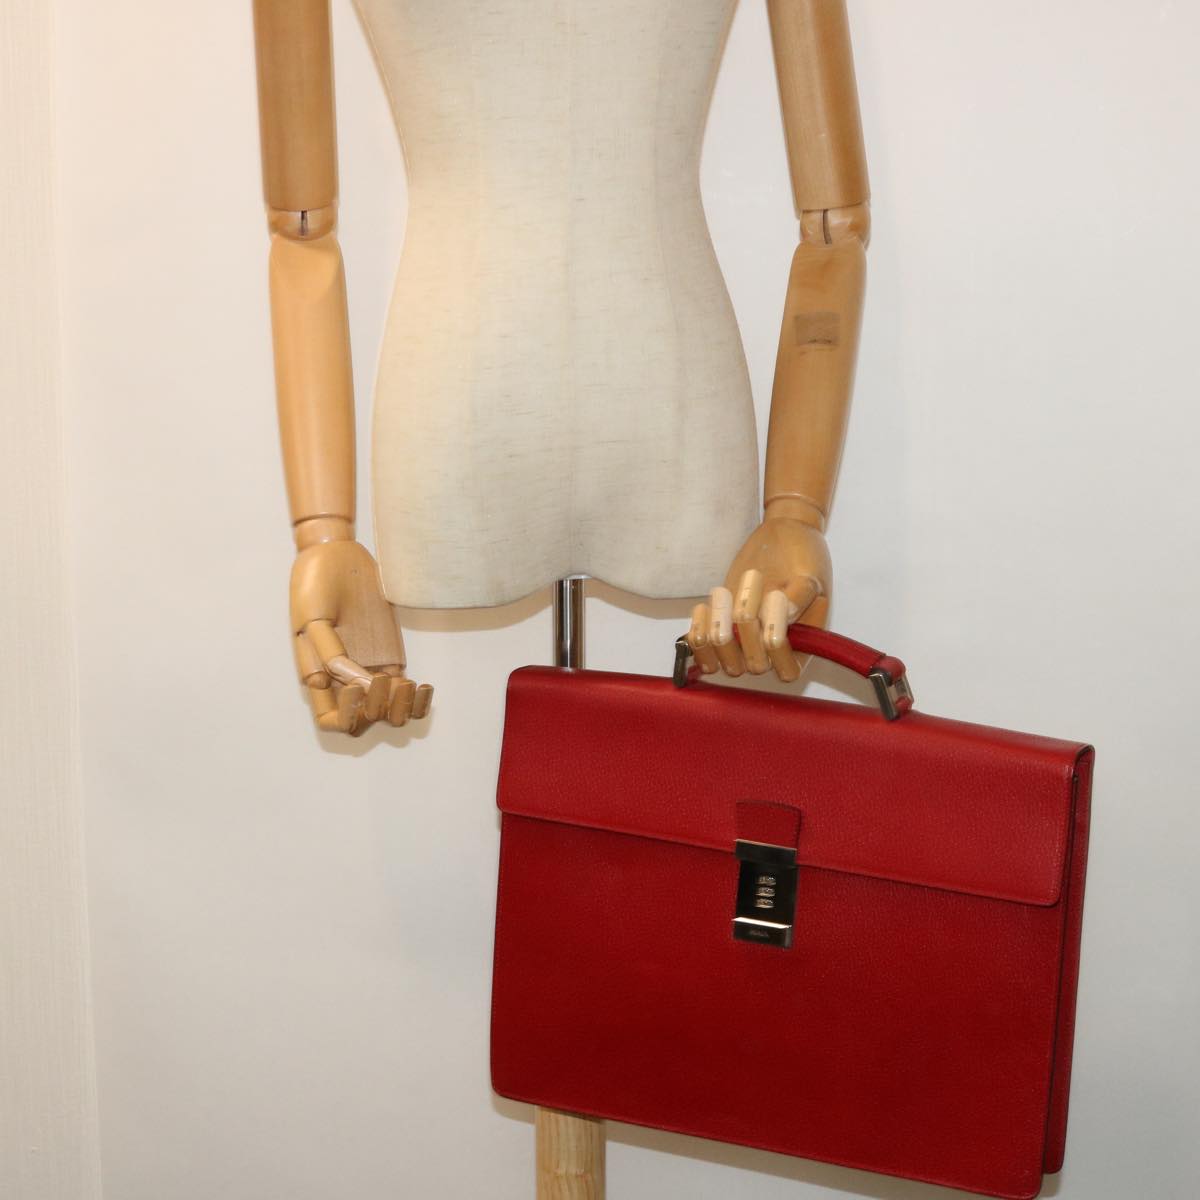 PRADA Business Bag Leather Red Auth bs8456